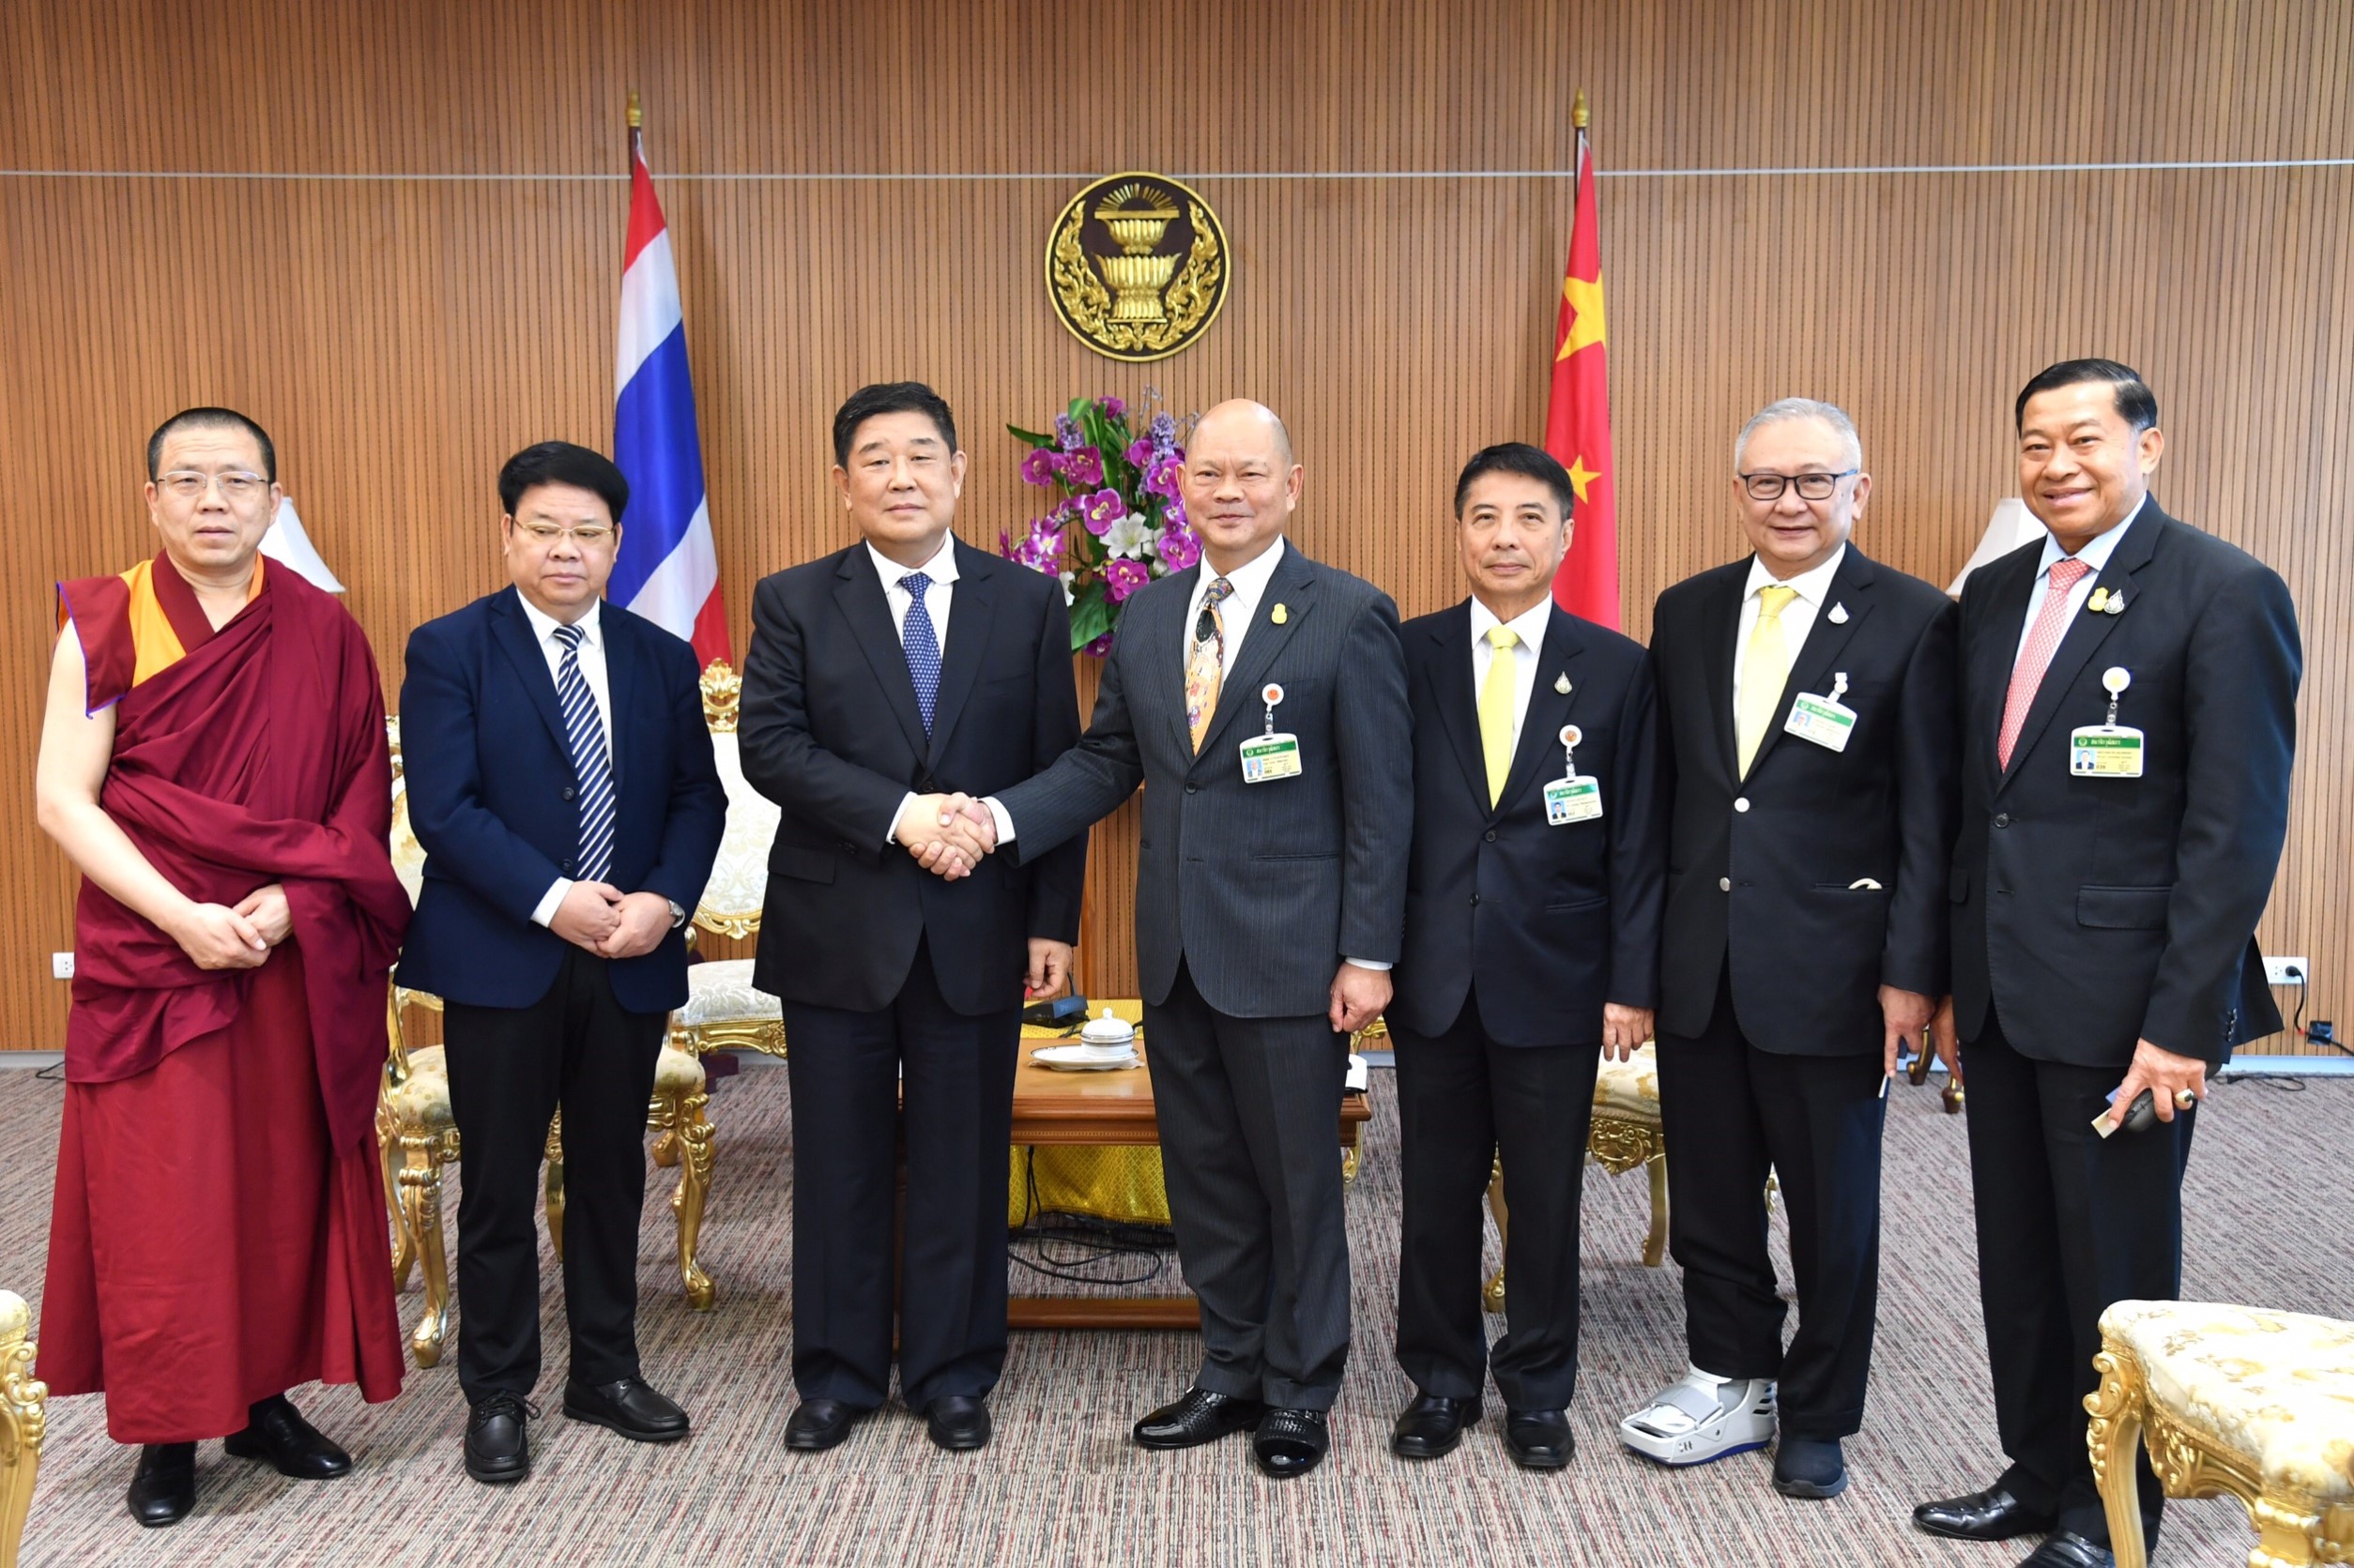 Mr. Quan Zhezhu, Vice-Chairman of the Committee on Ethnic Group and Religious Affairs, Chinese People’s Political Consultative Conference, and Delegation Conversed with the President of Thailand-China Parliamentarians’ Friendship Group (11 November 2019)